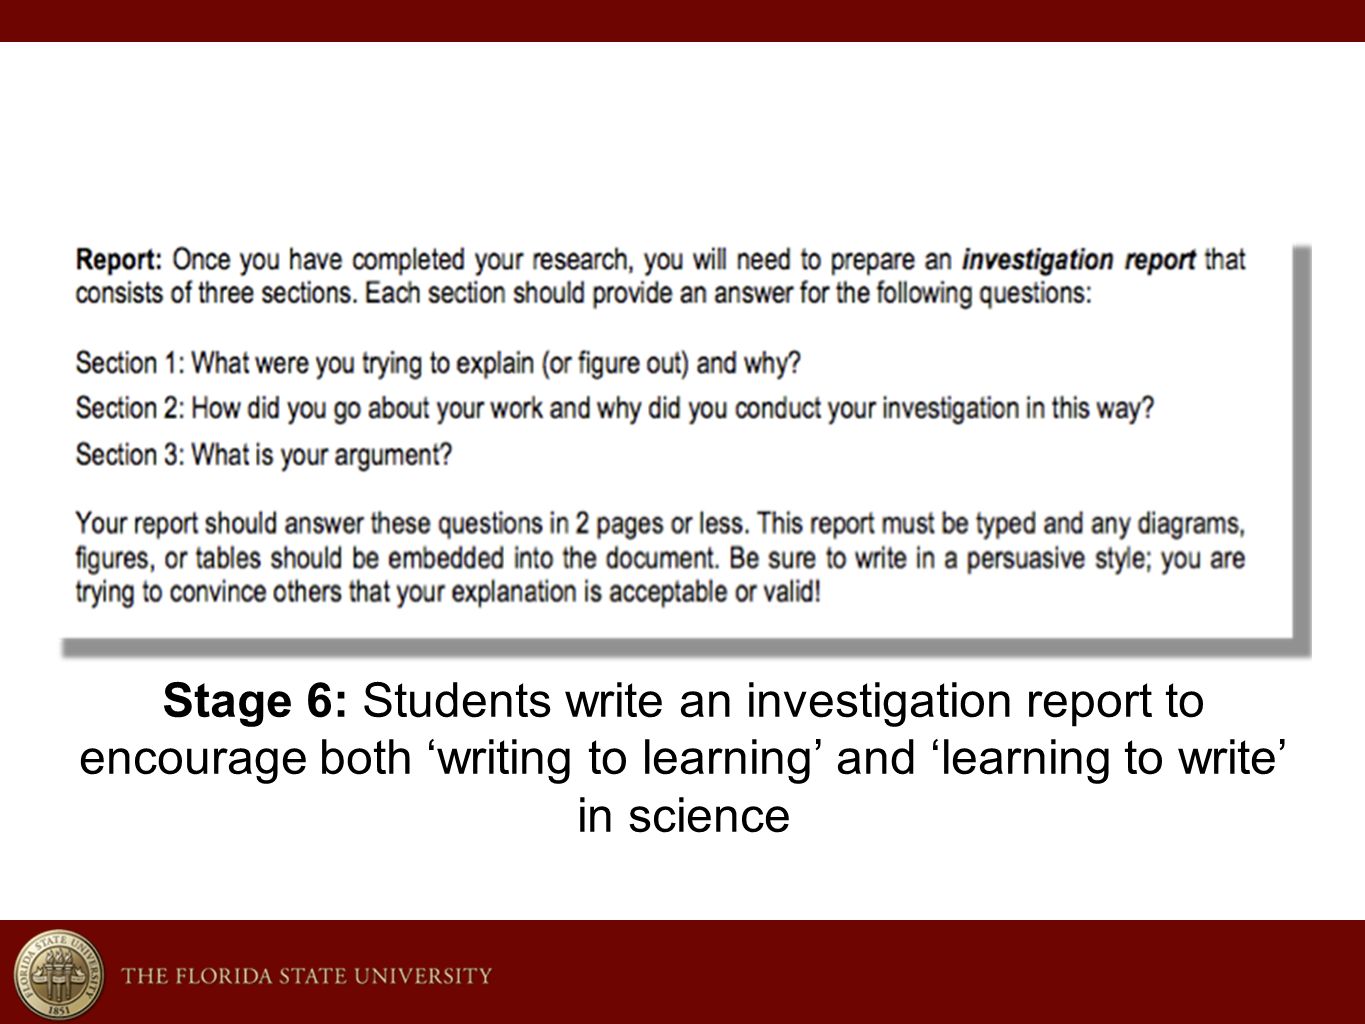 Stage 6: Students write an investigation report to encourage both ‘writing to learning’ and ‘learning to write’ in science